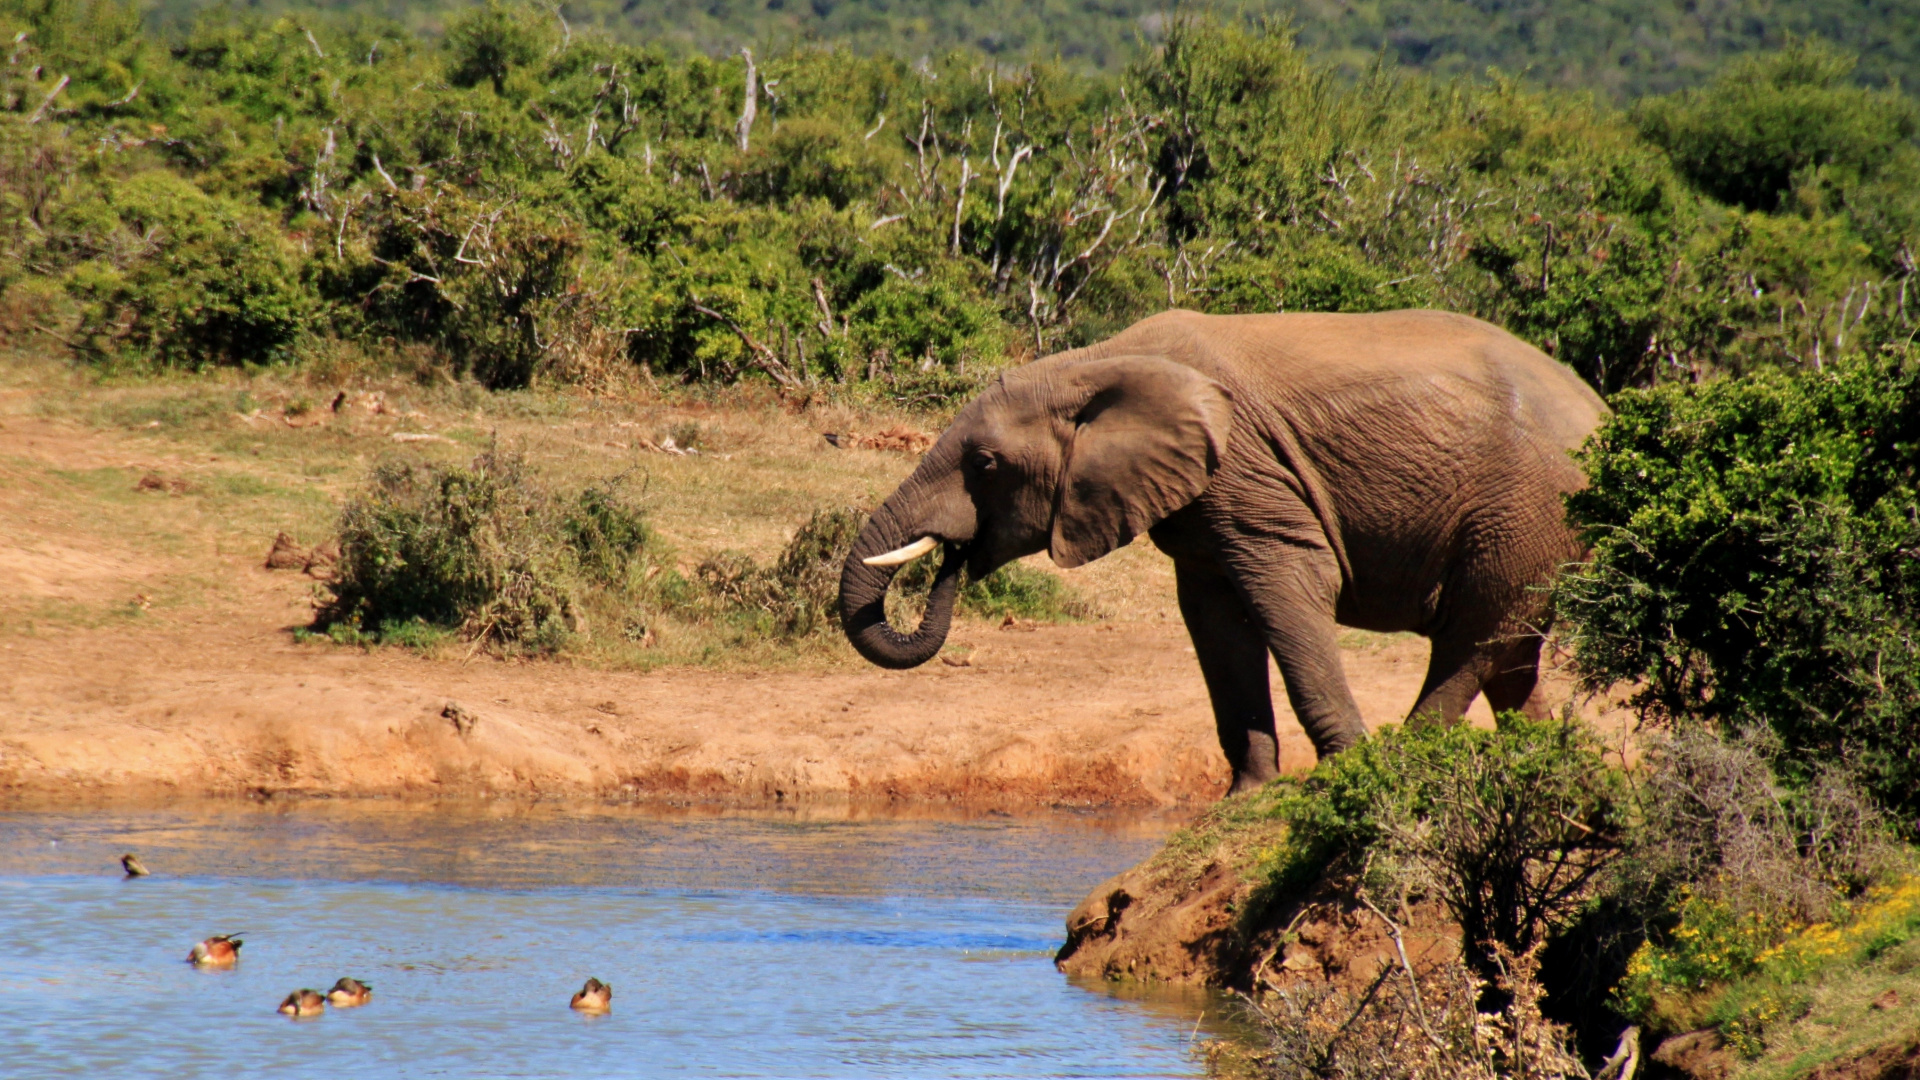 Elephant Drinking Water on River During Daytime. Wallpaper in 1920x1080 Resolution